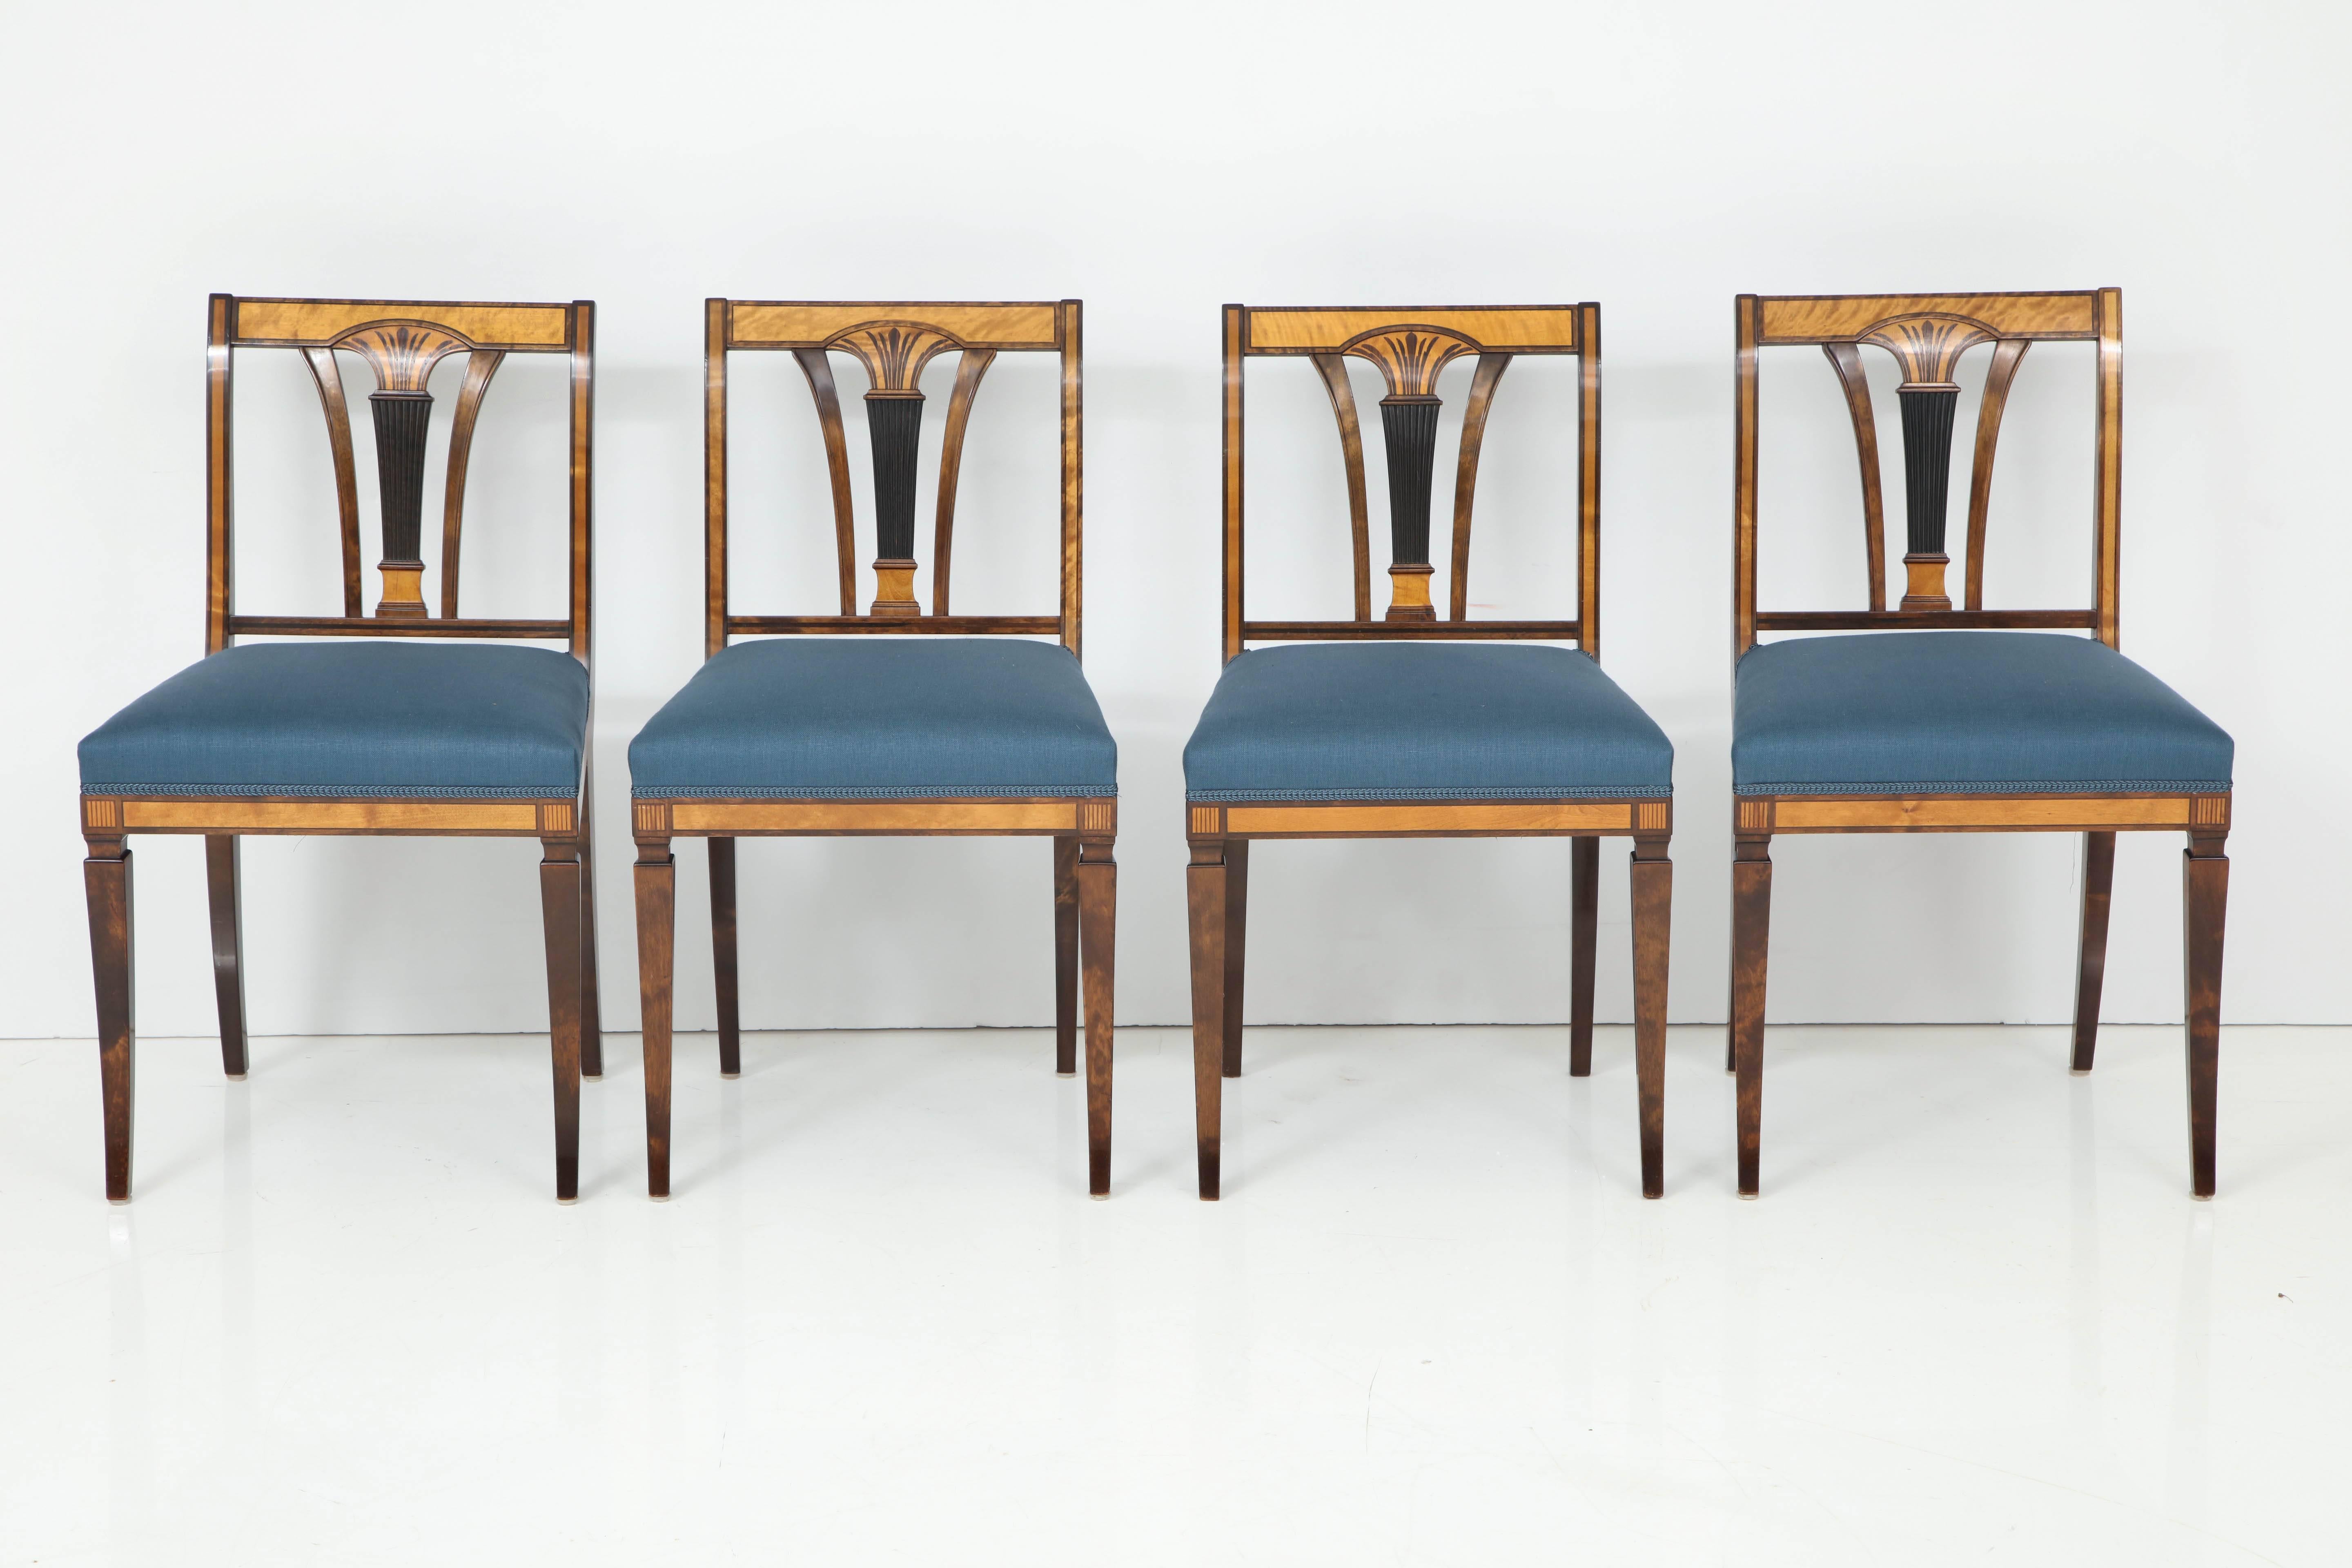 A set of four Swedish Grace birch, fruitwood and stencil decorated side chairs, circa 1930s, each with a rectangular backrest with a carved and decorated classically inspired back splat, upholstered seats raised on sabre legs.